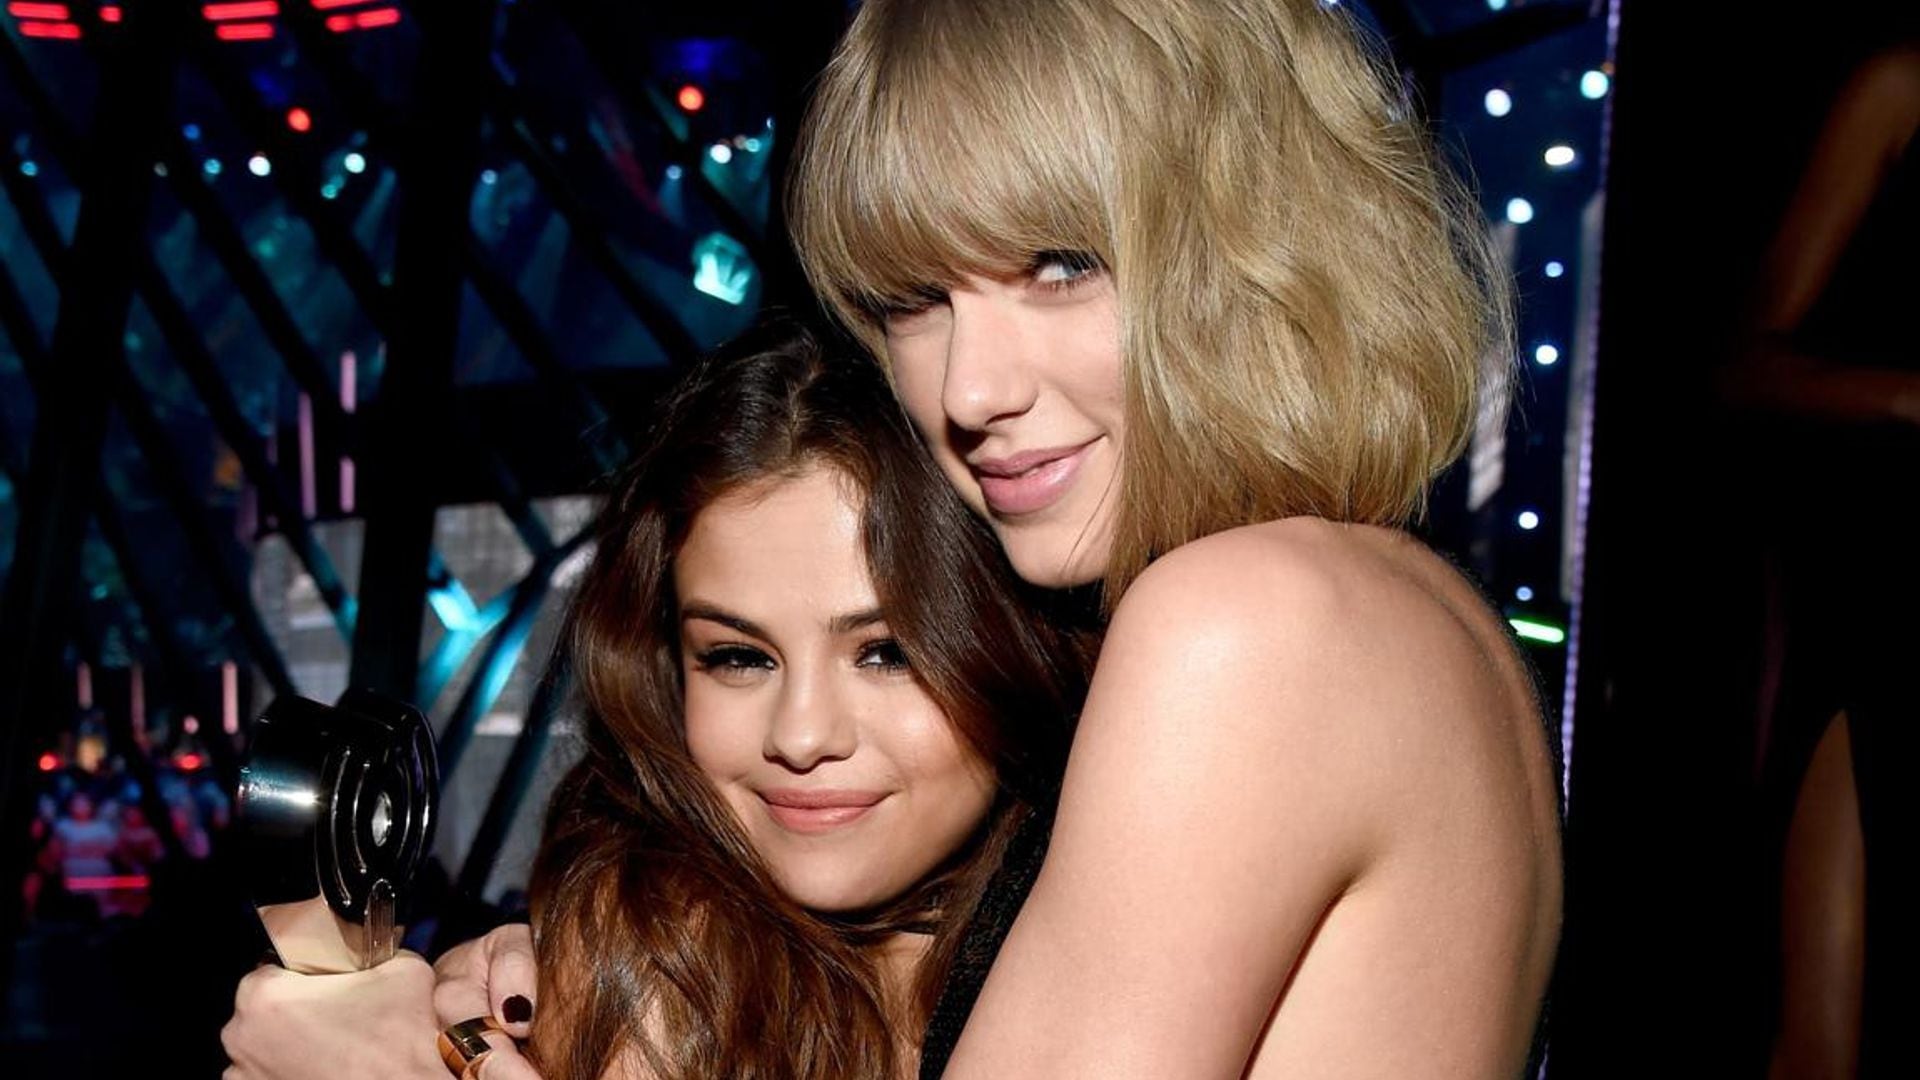 Selena Gomez and Taylor Swift have the sweetest friendship moment